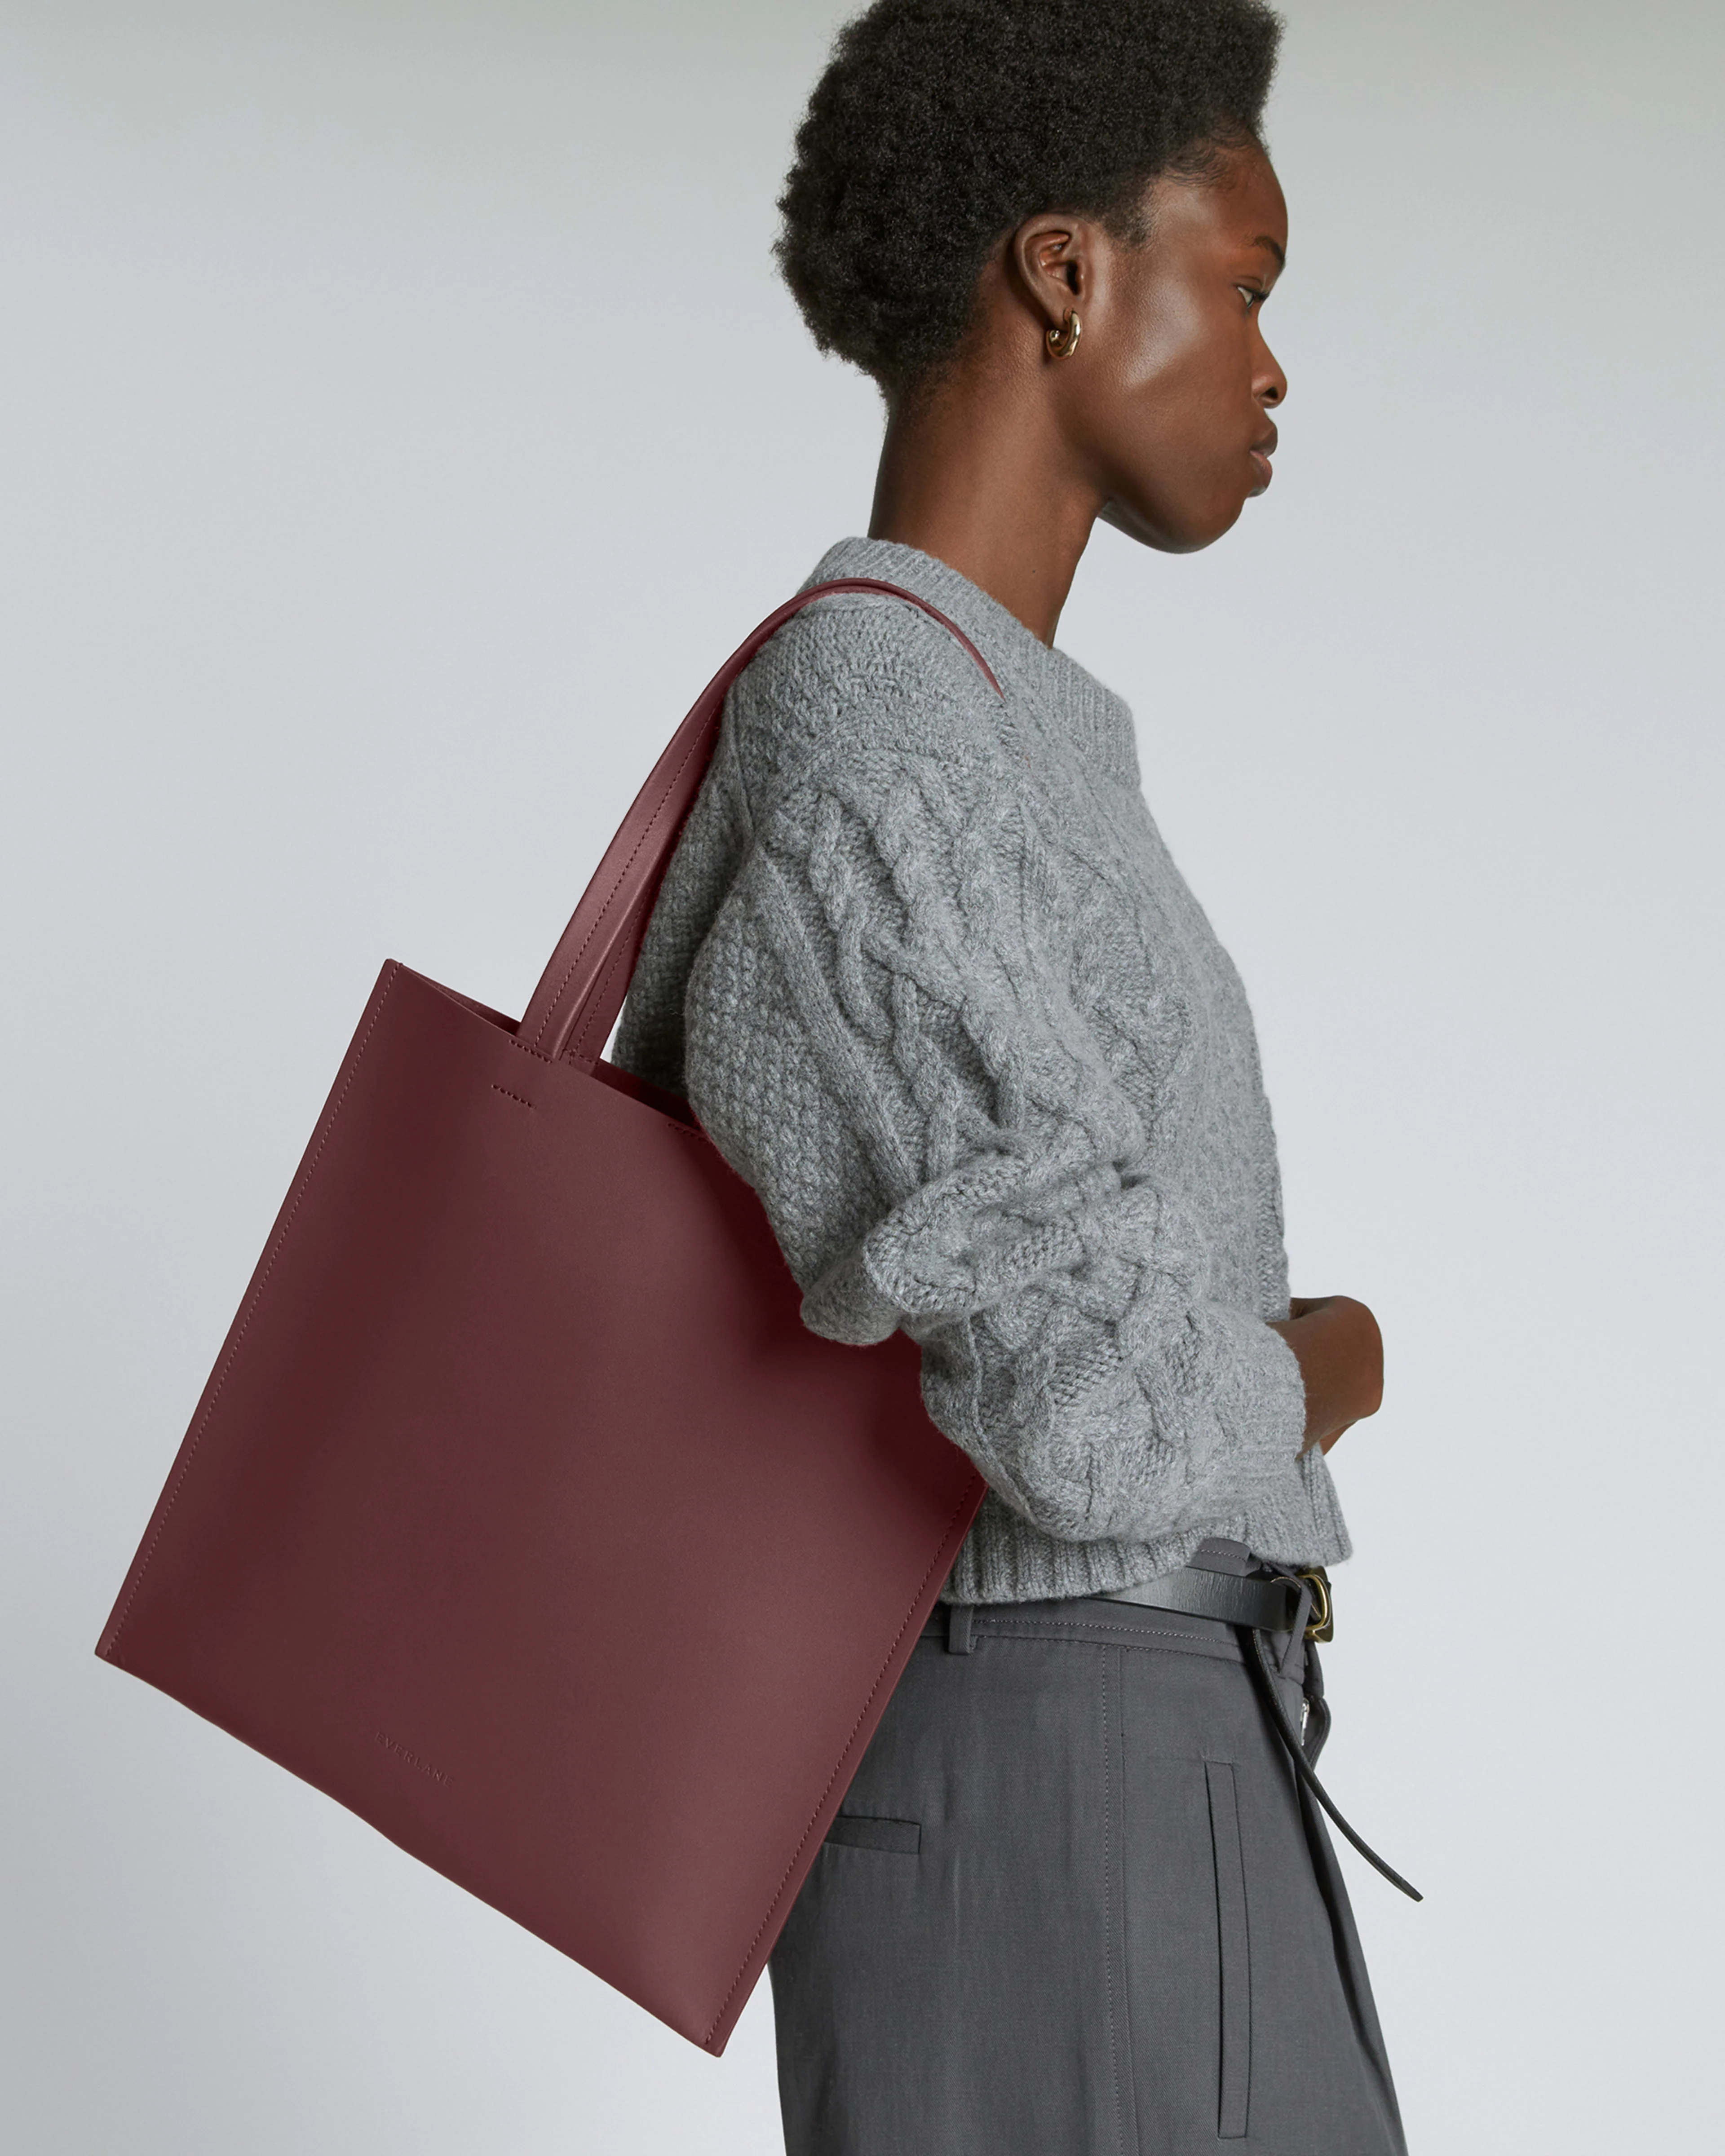 Everlane + The Gallery Tote